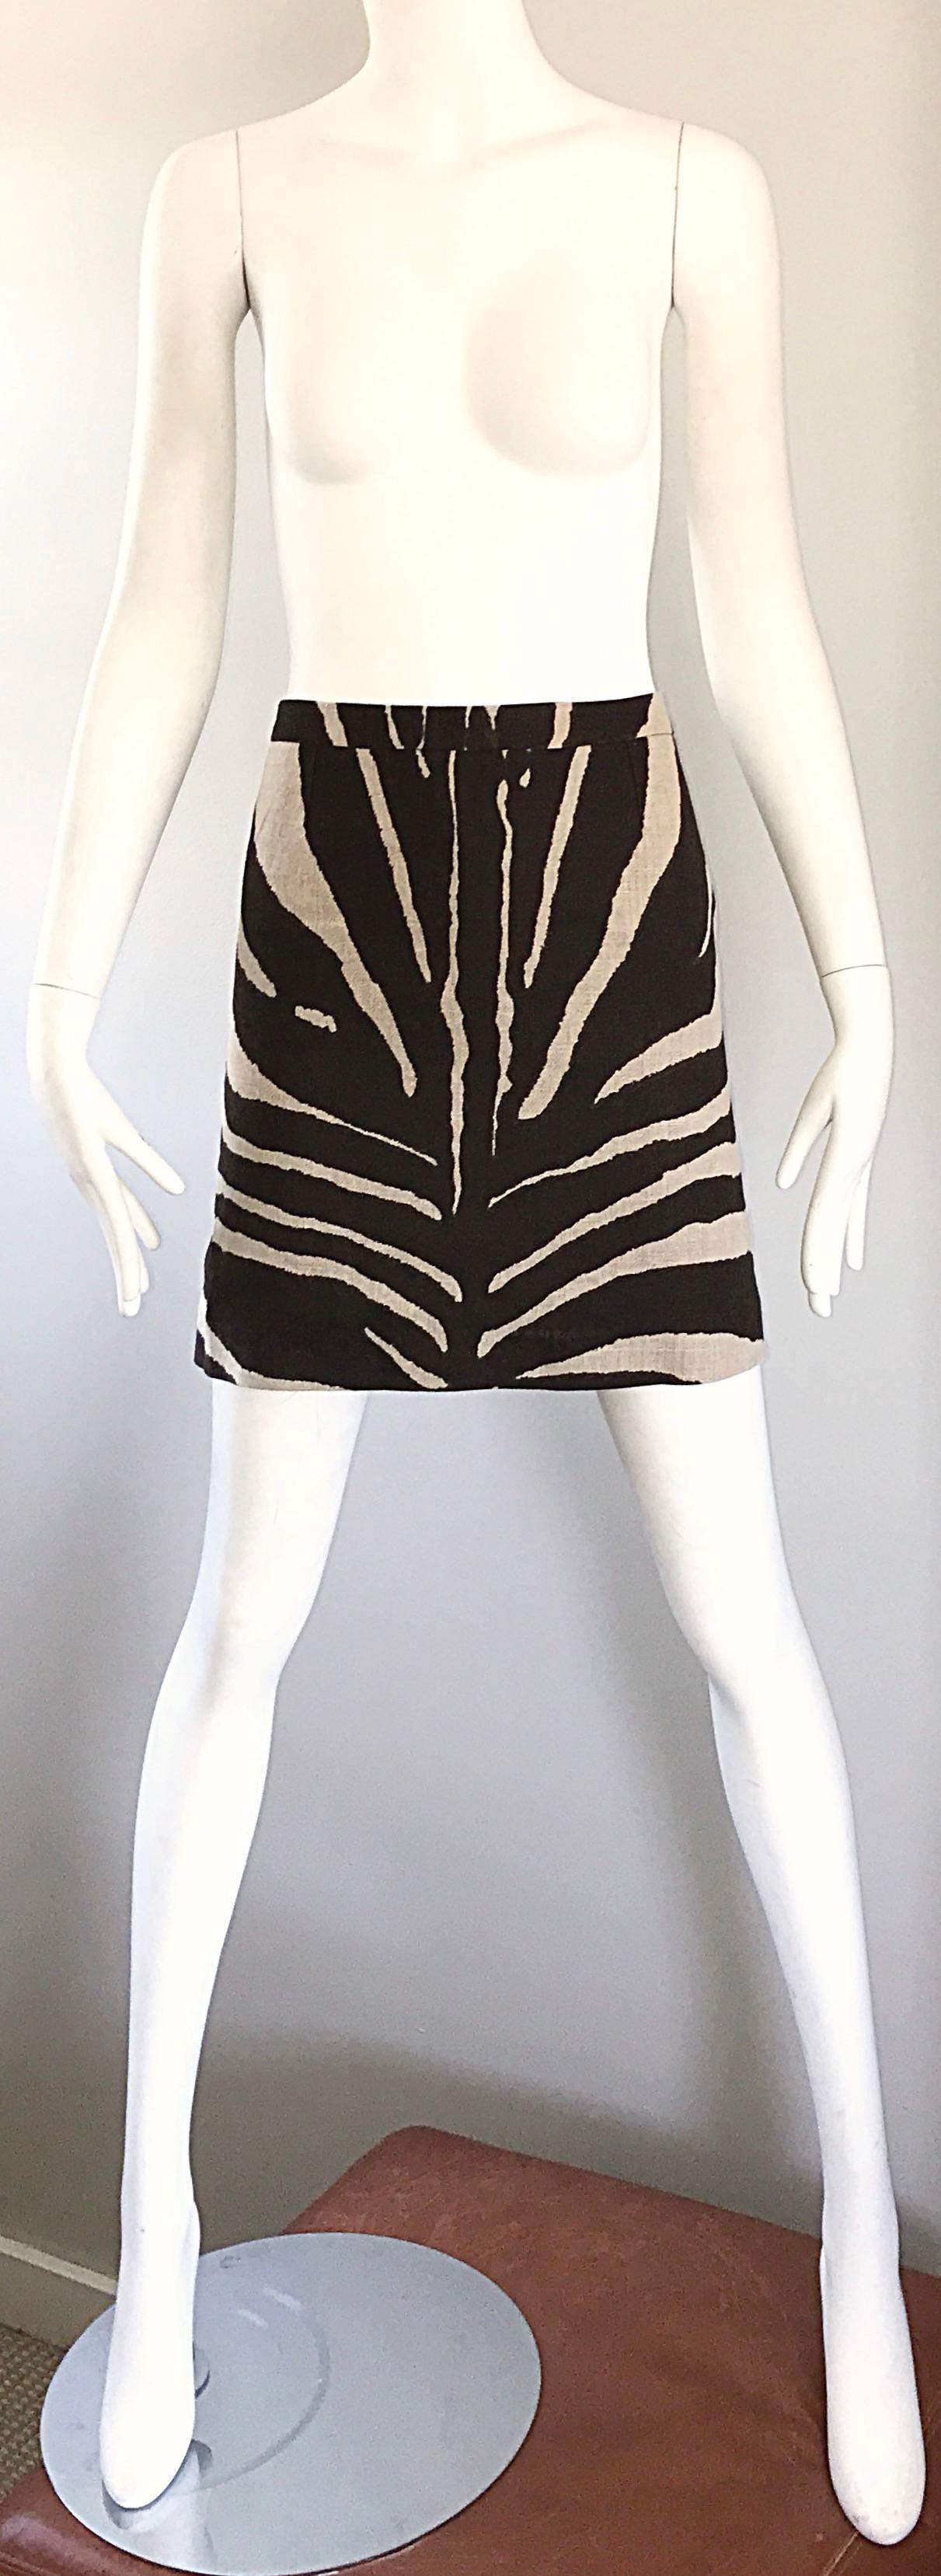 New with tags early 2000s MICHAEL KORS COLLECTION chocolate brown and ivory zebra print linen mini skirt! Mid to low rise fit, with soft Irish linen of the finest quality. Hidden zipper up the side with interior button. Fully lined. Perfect with a